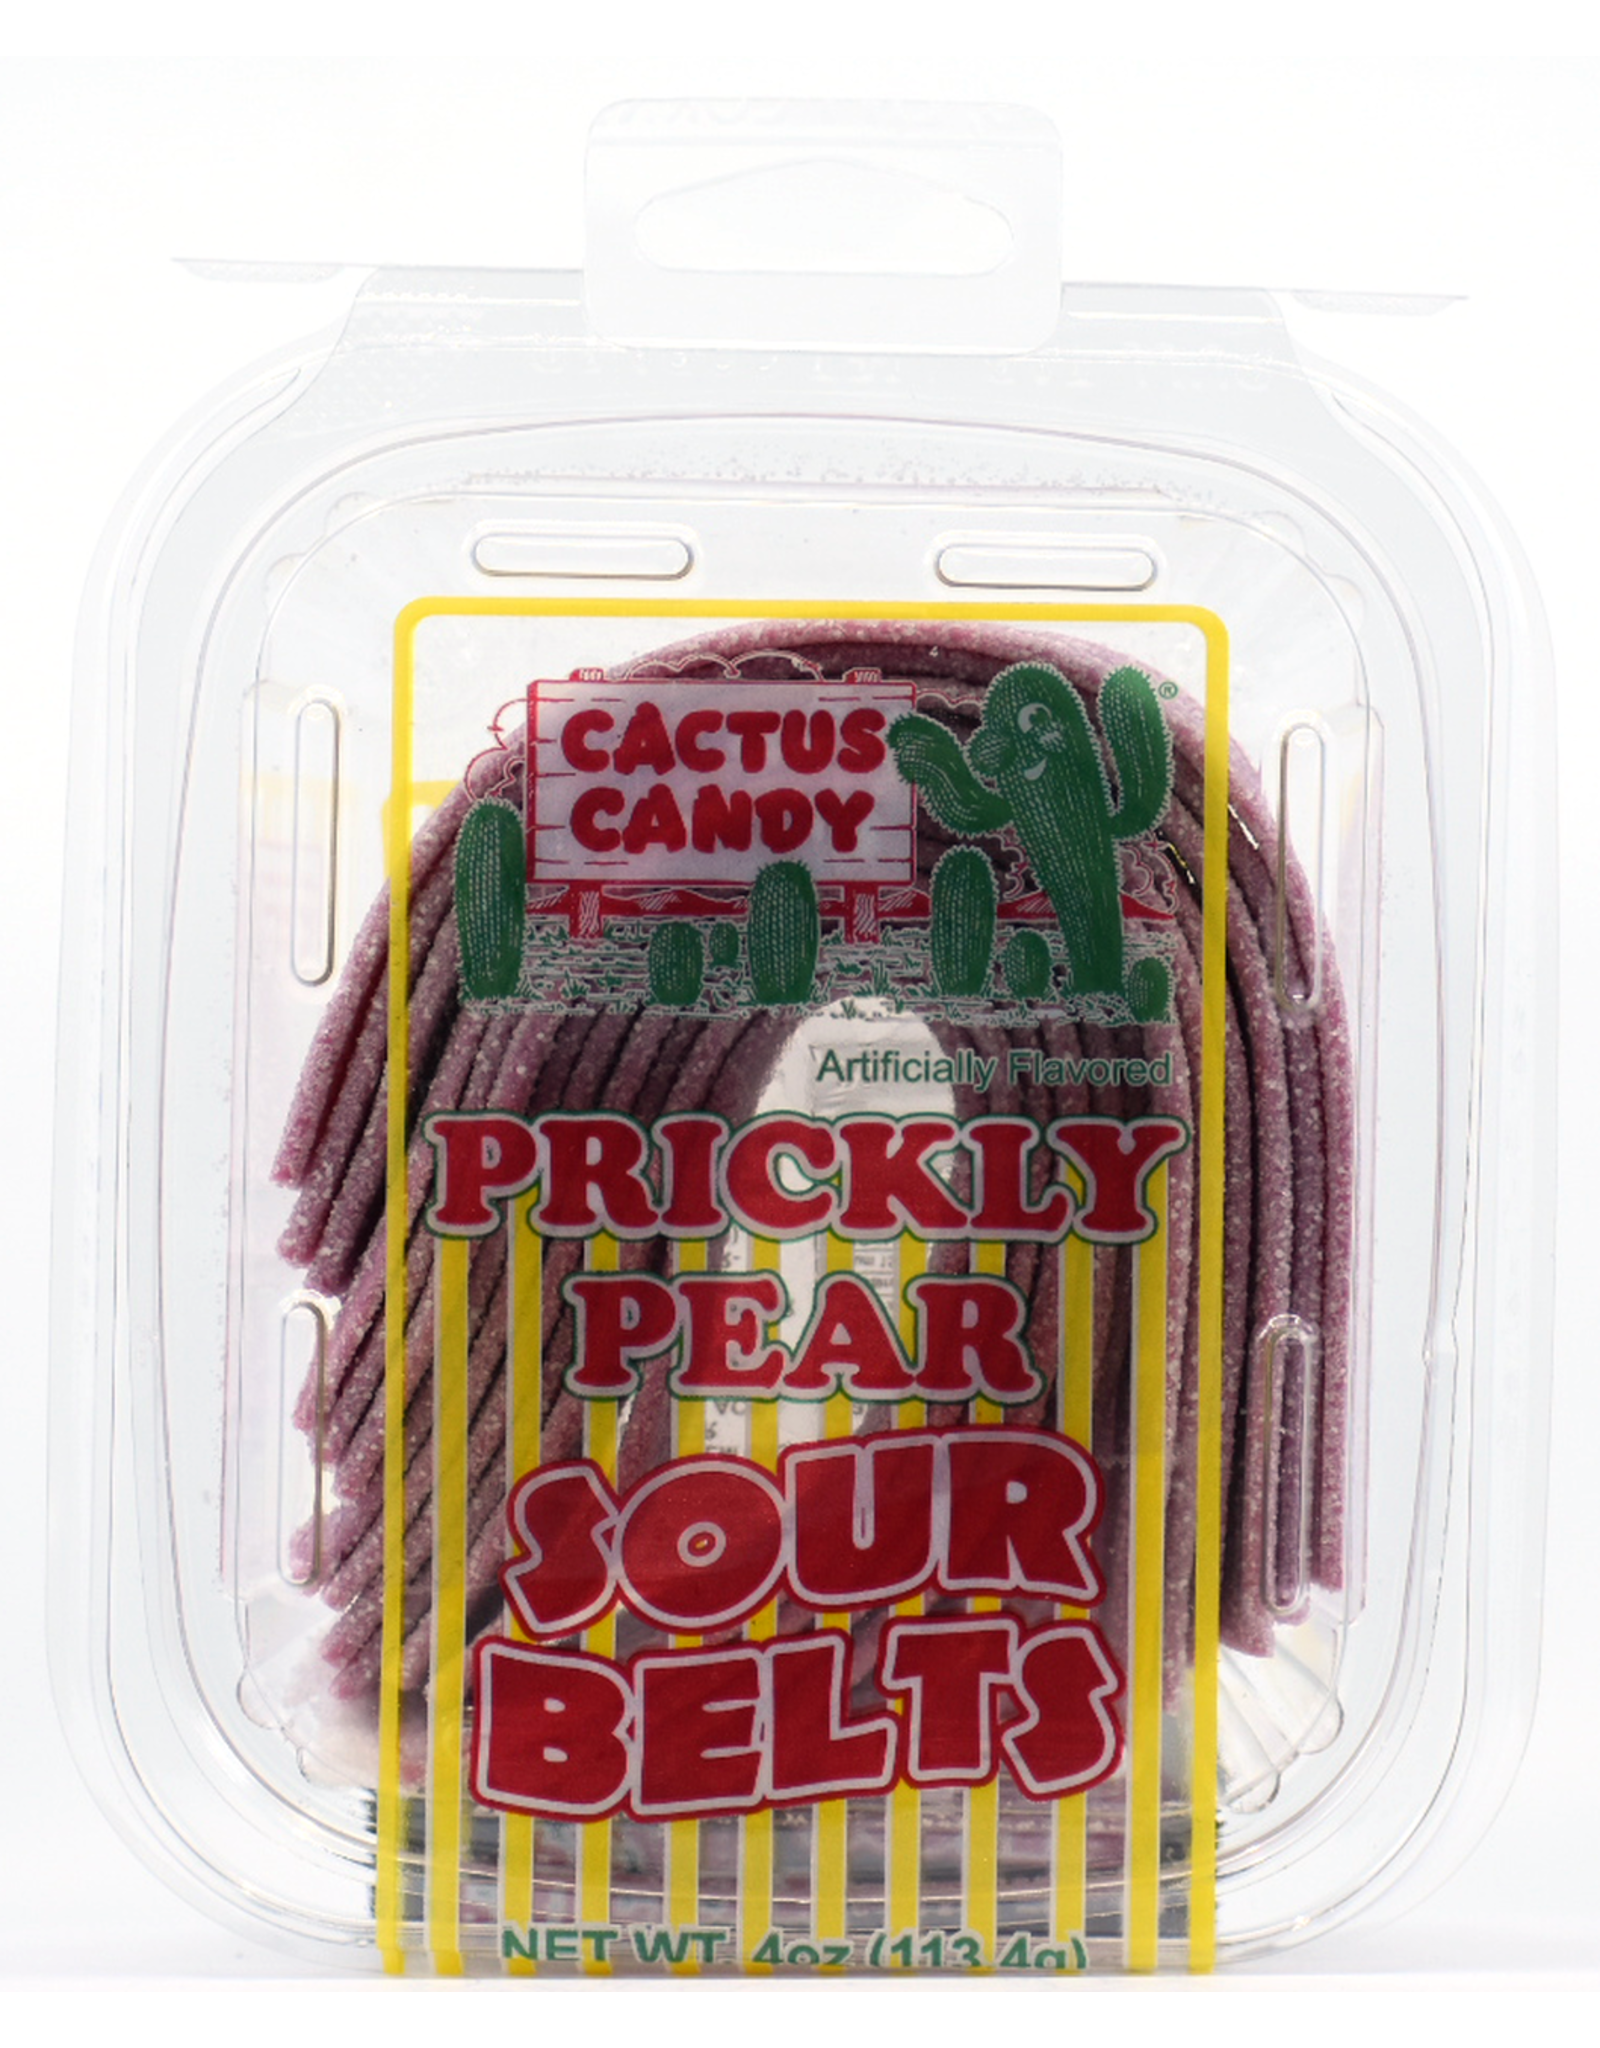 Prickly Pear Sour Belts